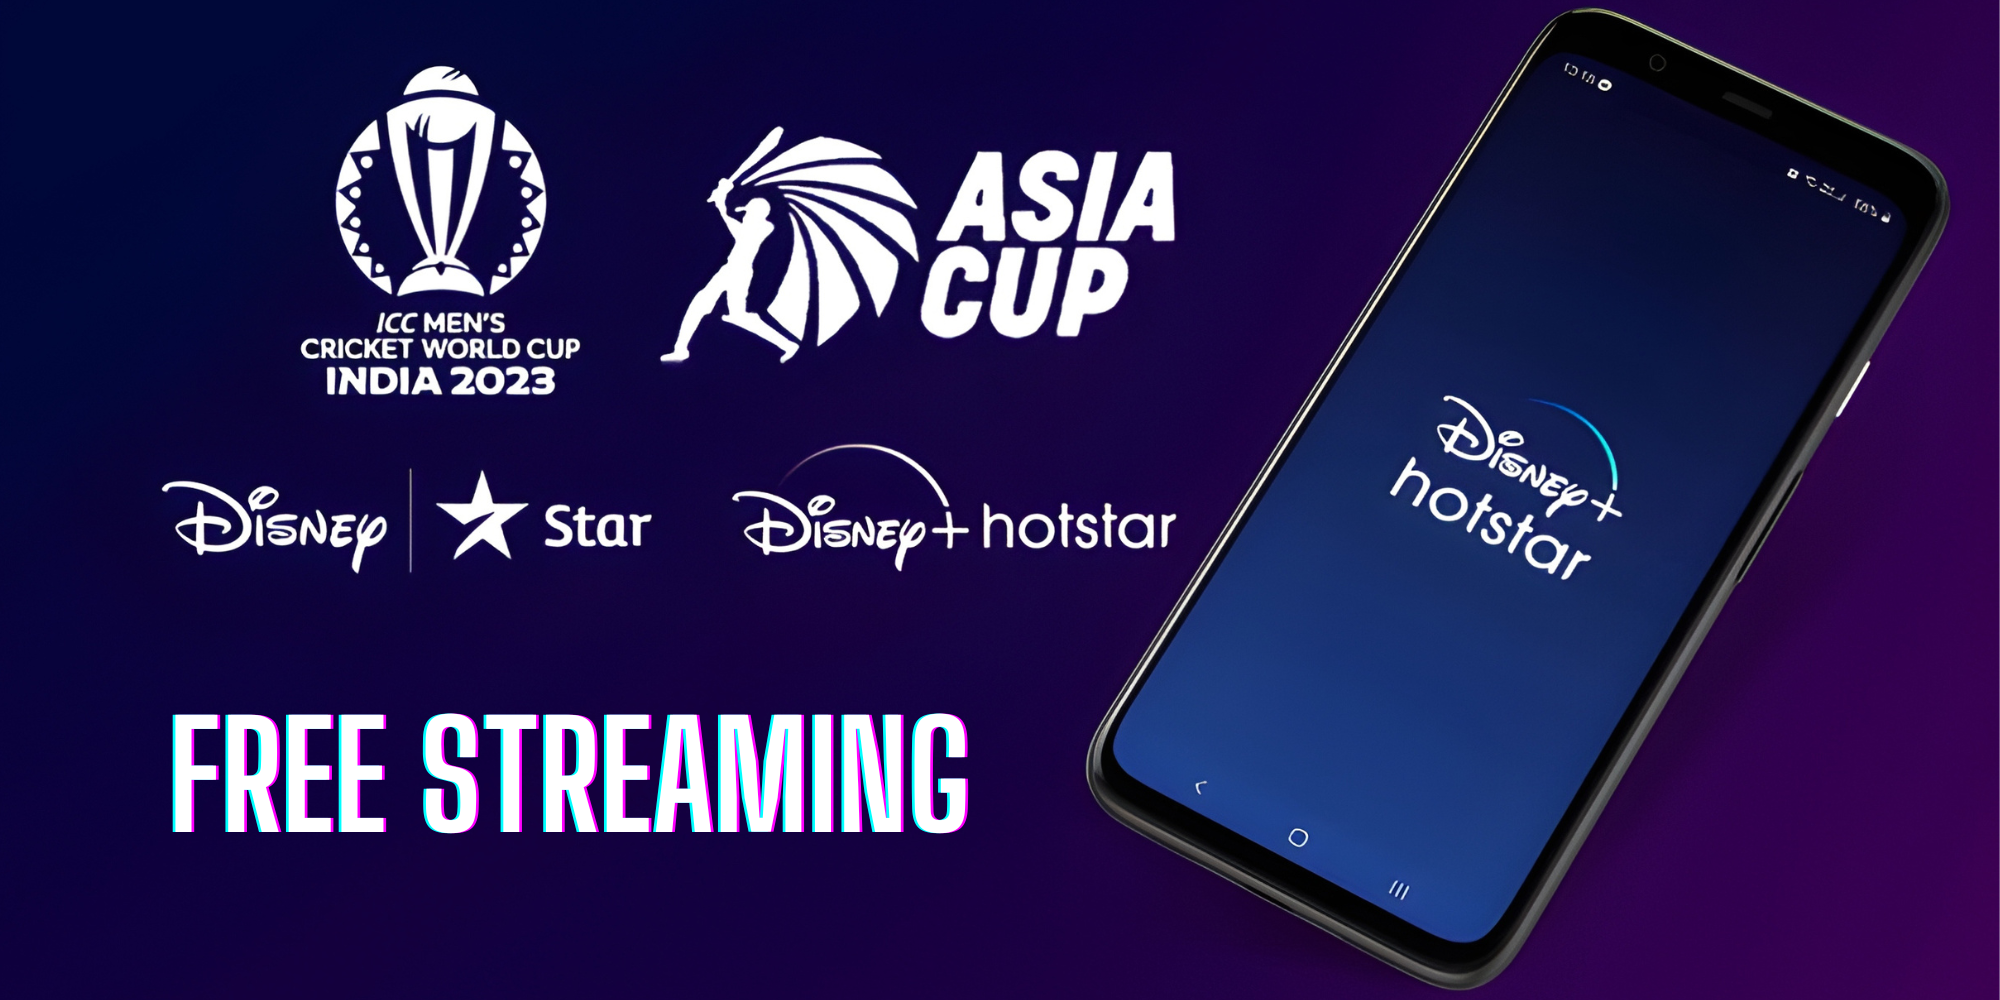 Hotstar Offers Free Streaming ICC and Asia Cup for Mobile Users